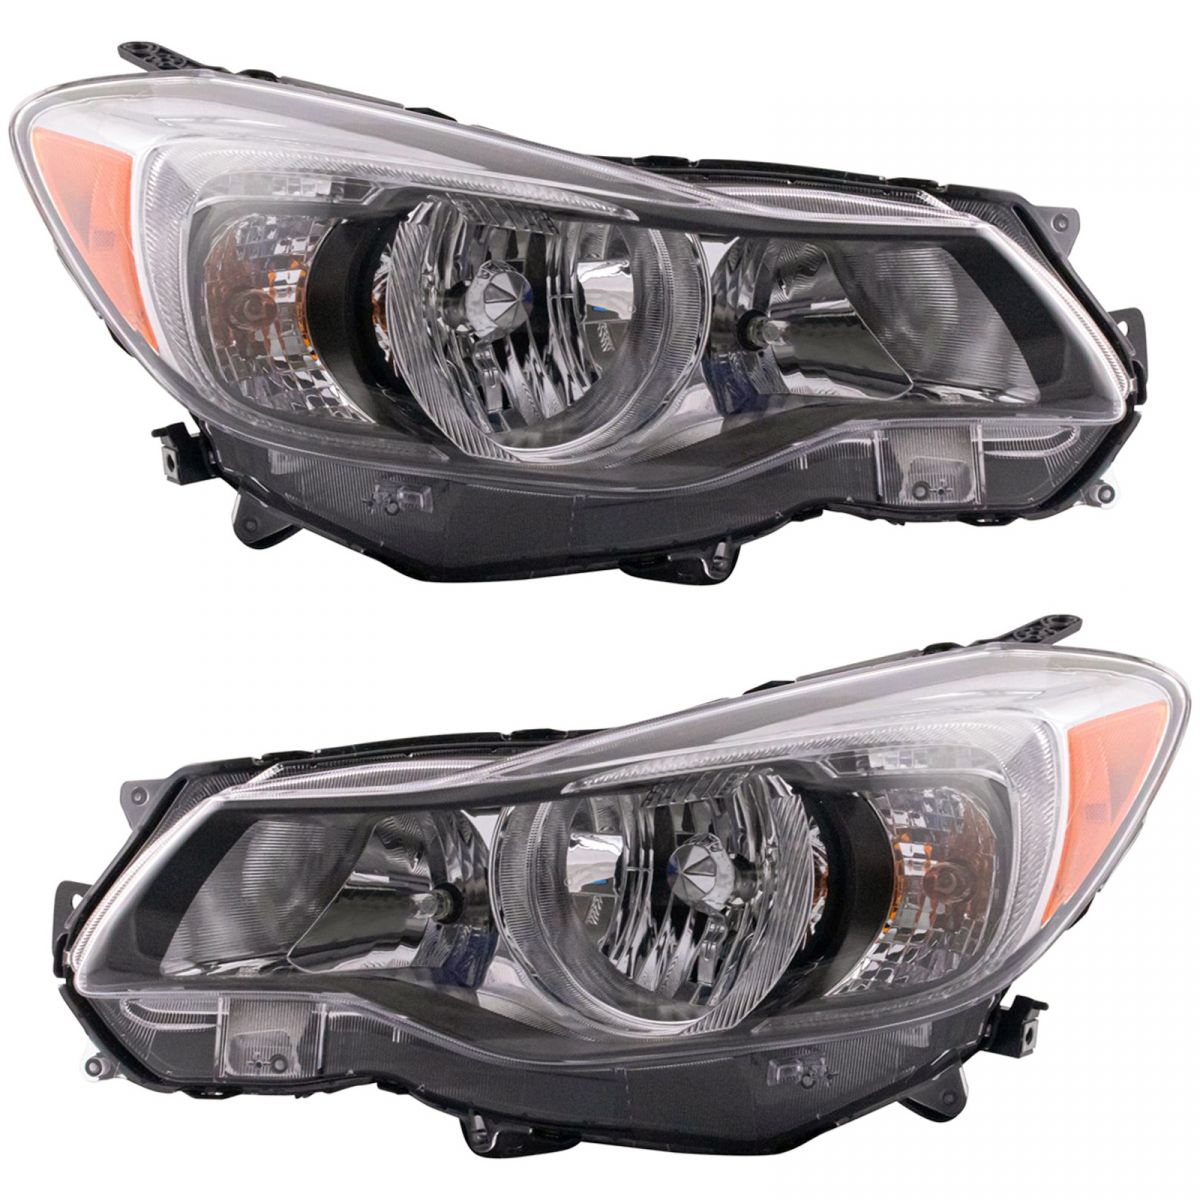 Halogen Headlight Lamp Assembly Pair LH RH Sides for